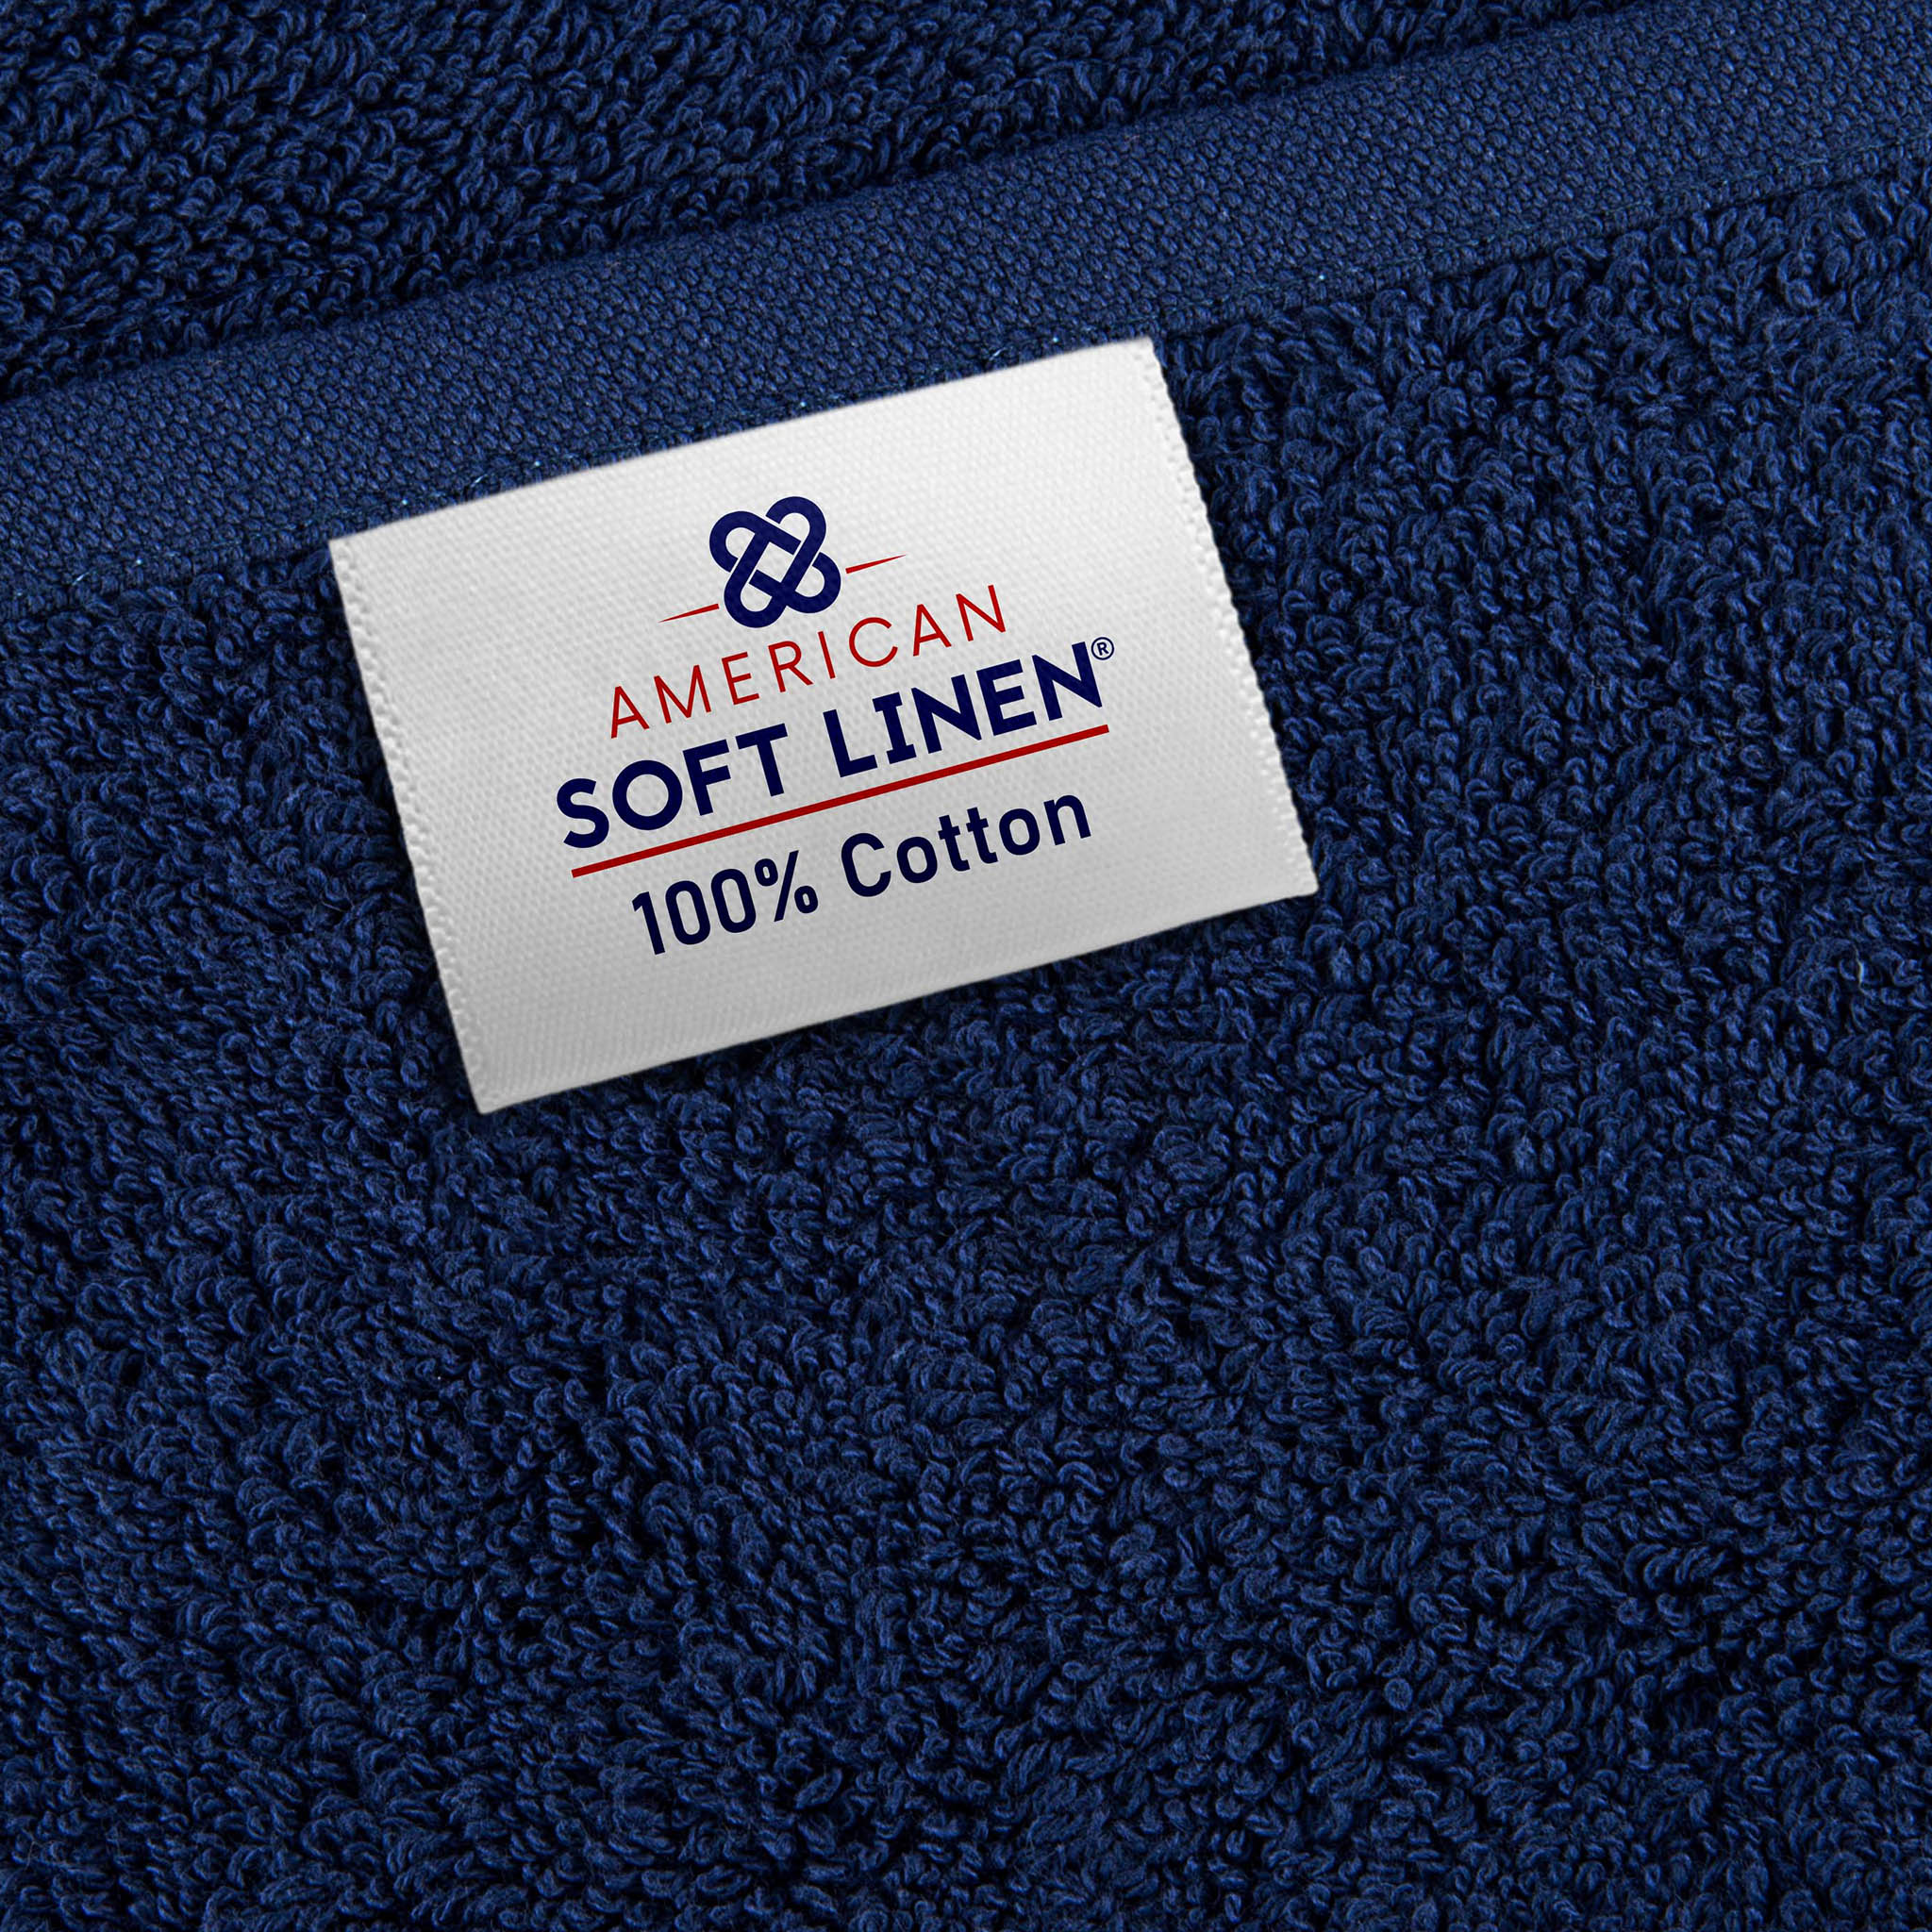 American Soft Linen 100% Ring Spun Cotton 40x80 Inches Oversized Bath Sheets navy-blue-6